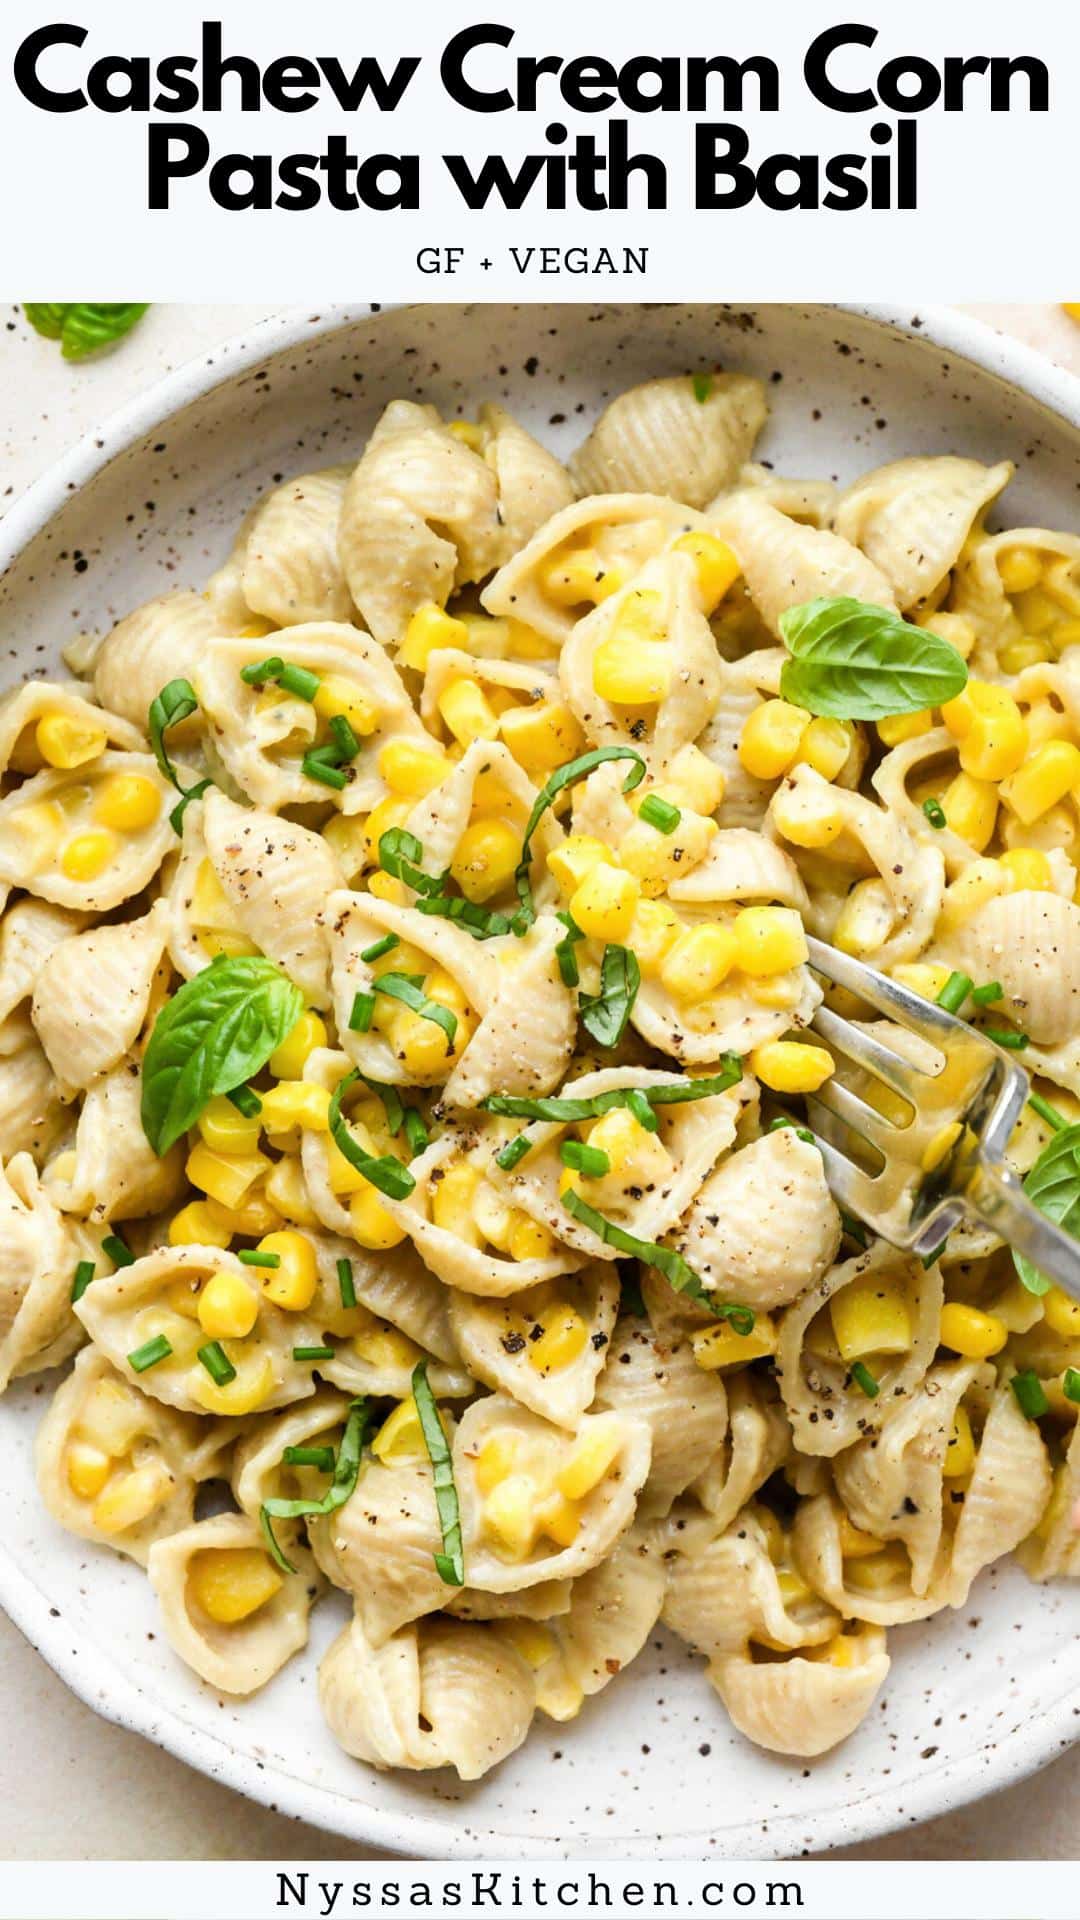 This super simple cashew cream corn pasta with basil makes the best quick summer meal! Made with an exceptionally creamy (easy to make!) cashew-based sauce, fresh or frozen sweet corn, your favorite pasta, and basil. It will delight the entire table for lunch, dinner, or as a flavorful side dish. It is GF, dairy free, vegan, and vegetarian.